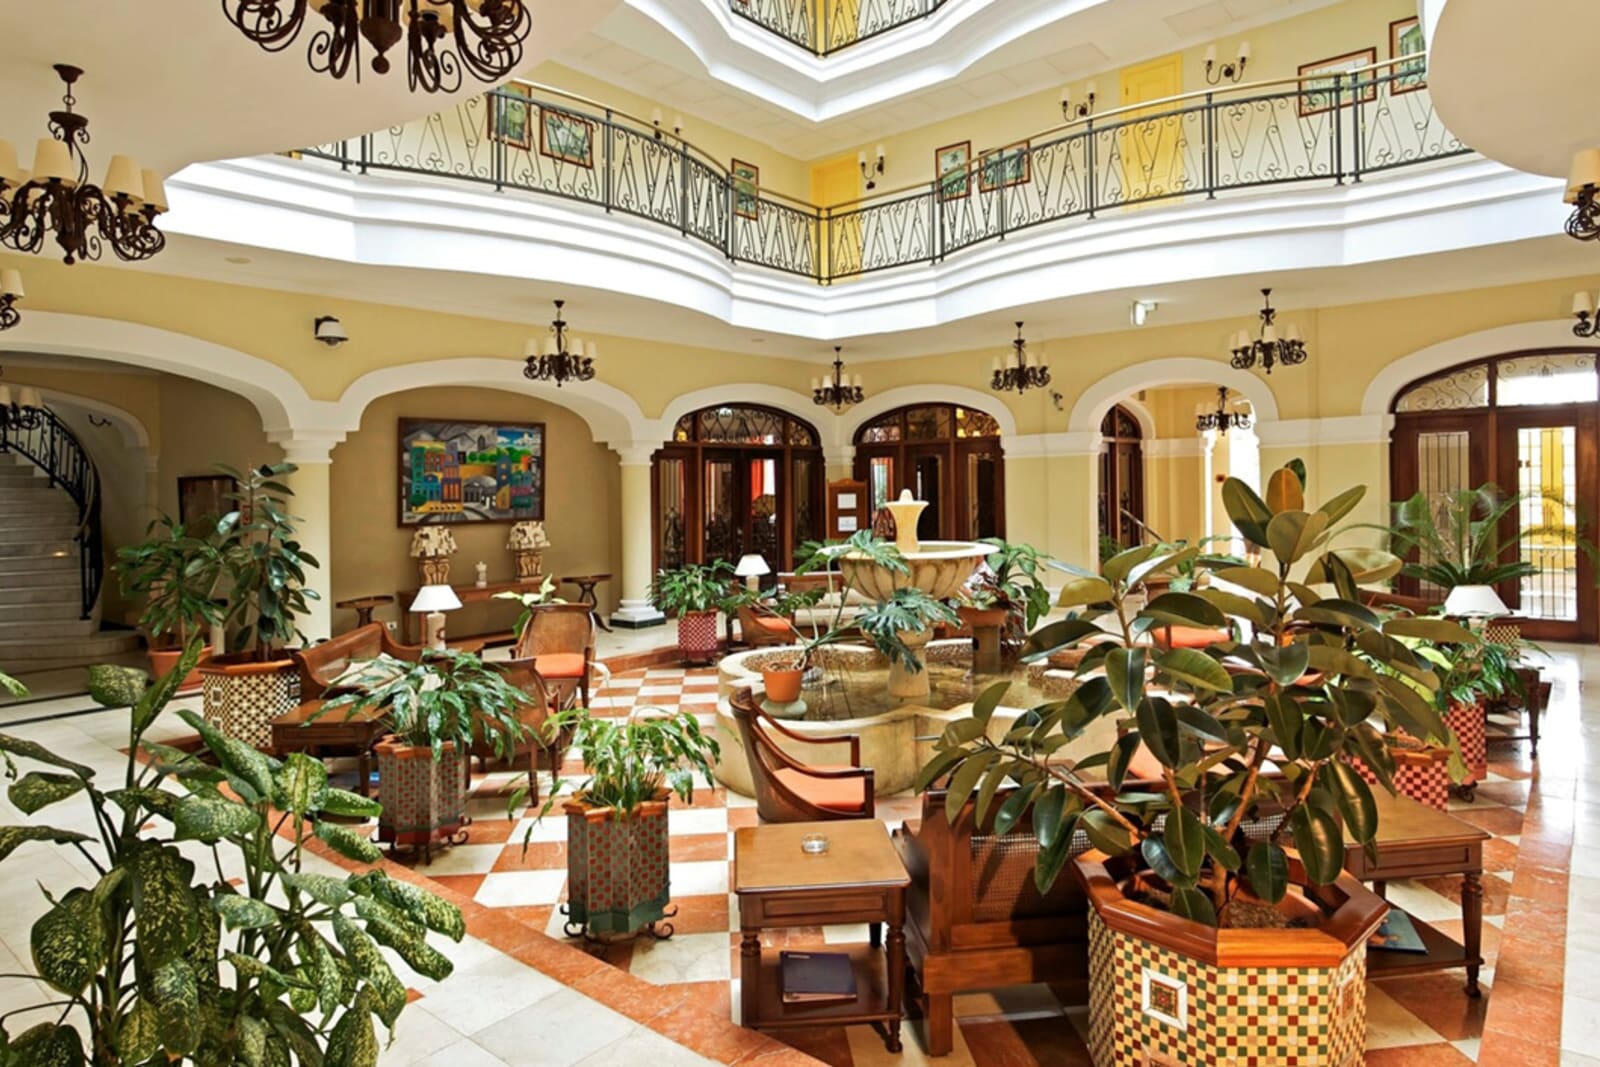 The adults-only all-inclusive Iberostar Grand Trinidad resort in Trinidad, Cuba is a beautifully refurbished heritage building